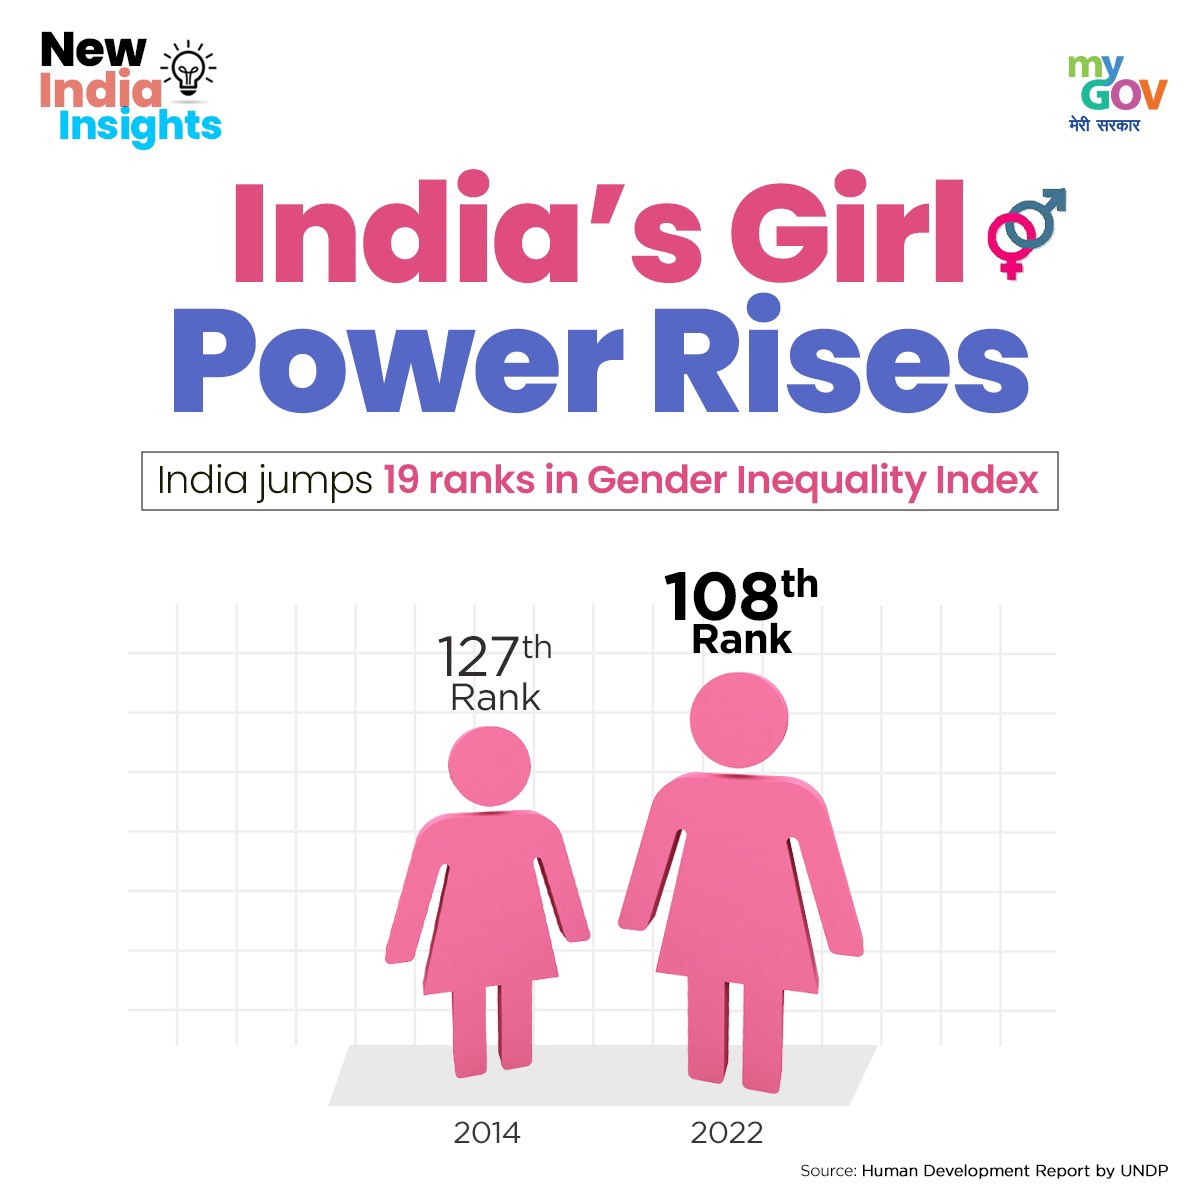 India's Gender Equality on the Rise! According to the UNDP's Human Development Report, India has jumped 19 ranks in the Gender Inequality Index, moving from 127th rank in 2014 to 108th rank in 2022. #GenderEquality #NewIndia #PMModi